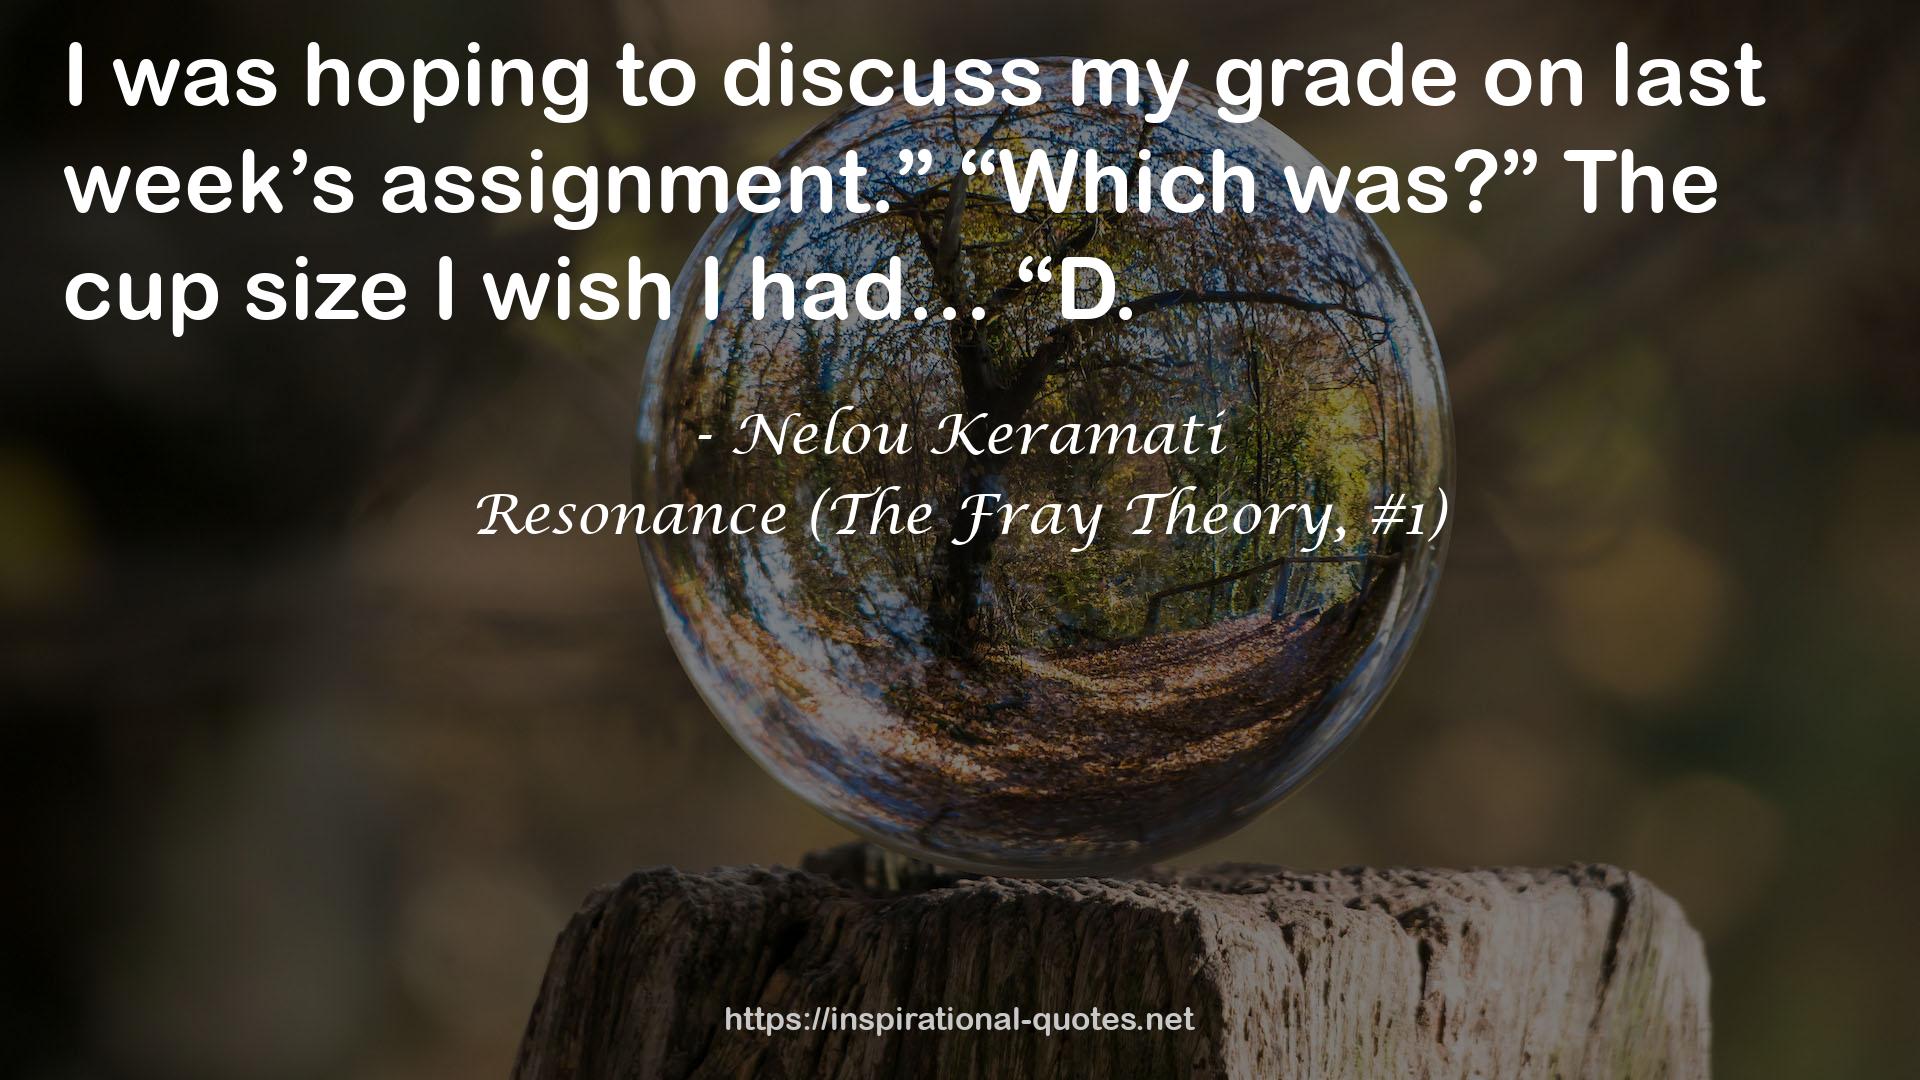 Resonance (The Fray Theory, #1) QUOTES